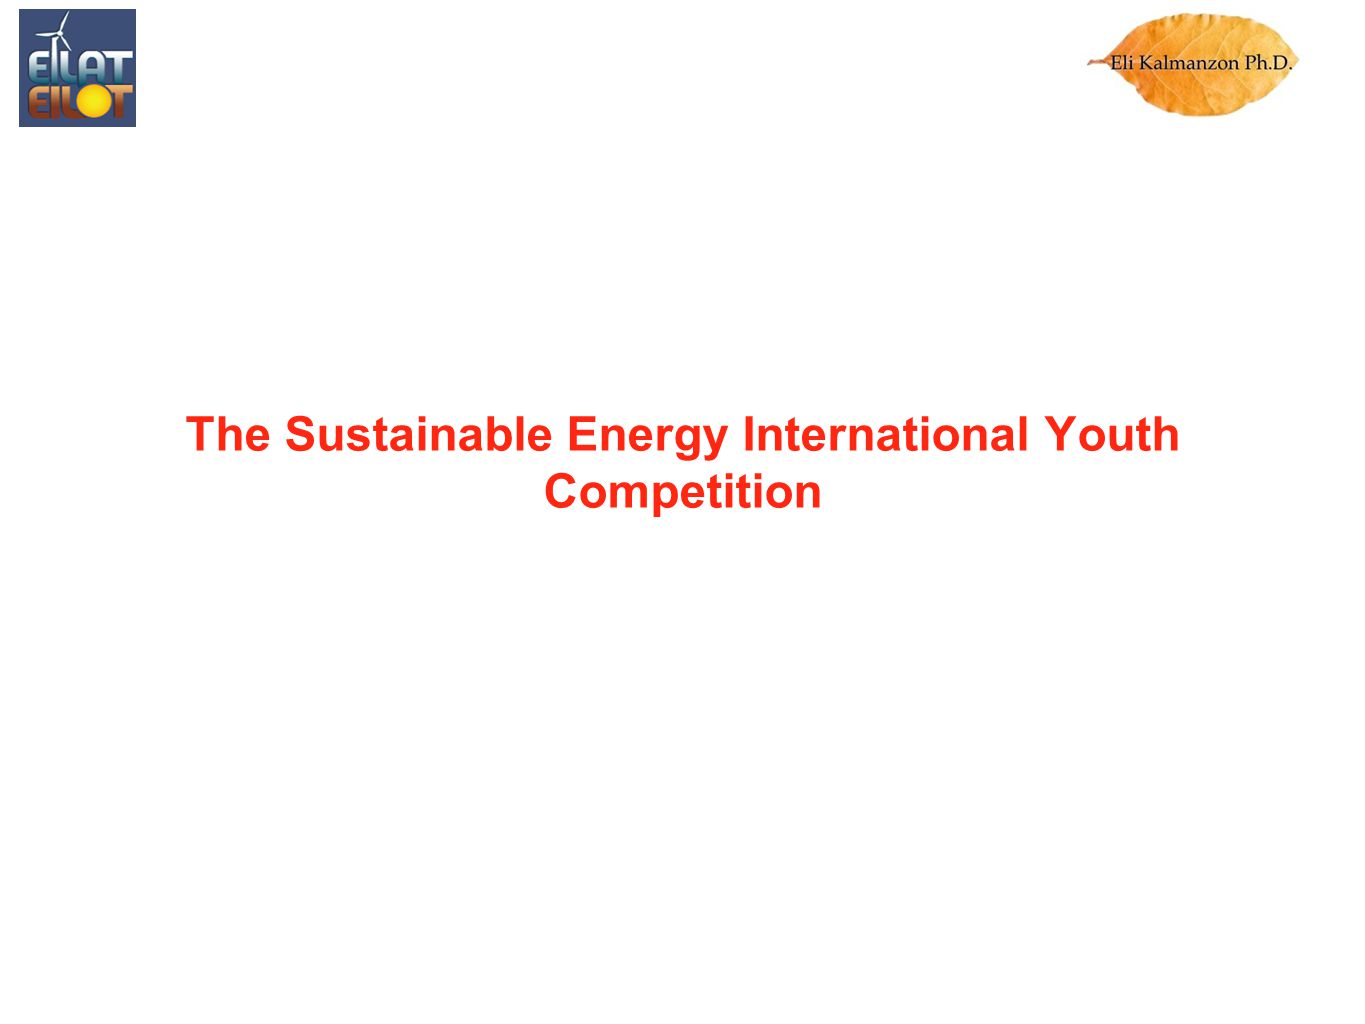 The Sustainable Energy International Youth Competition